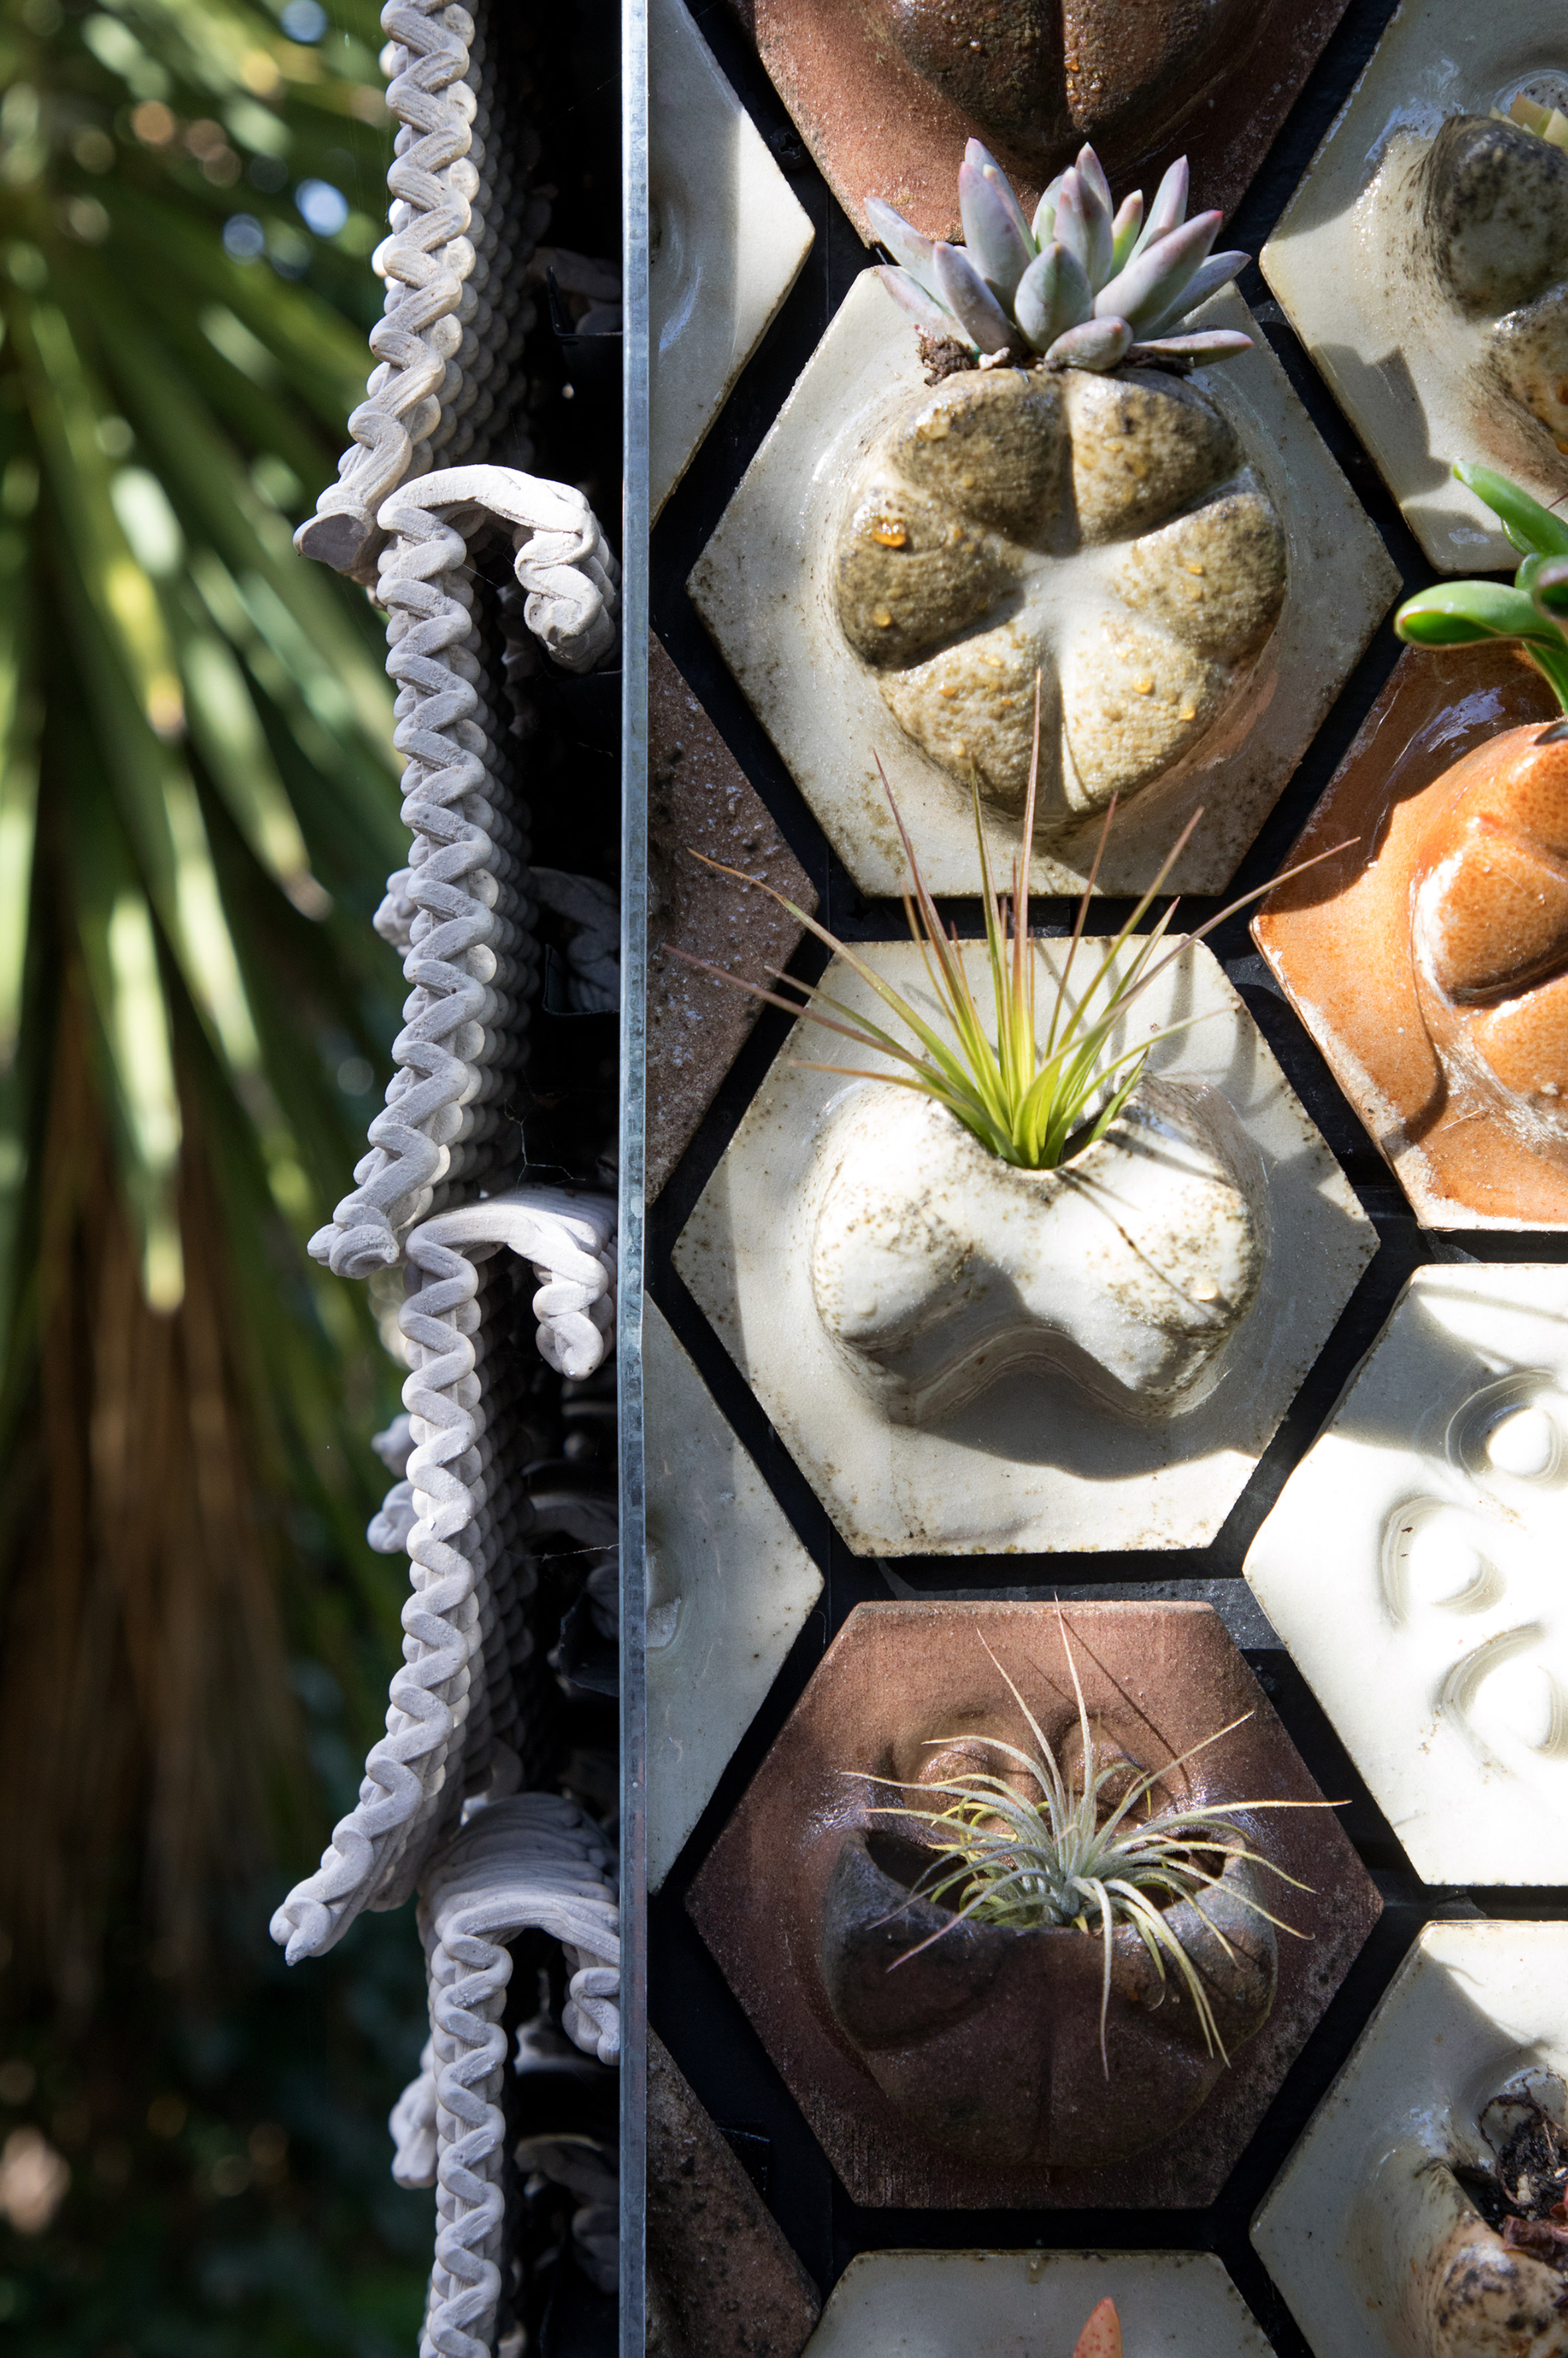 Cabin of 3D printed curiosities by Emerging Objects